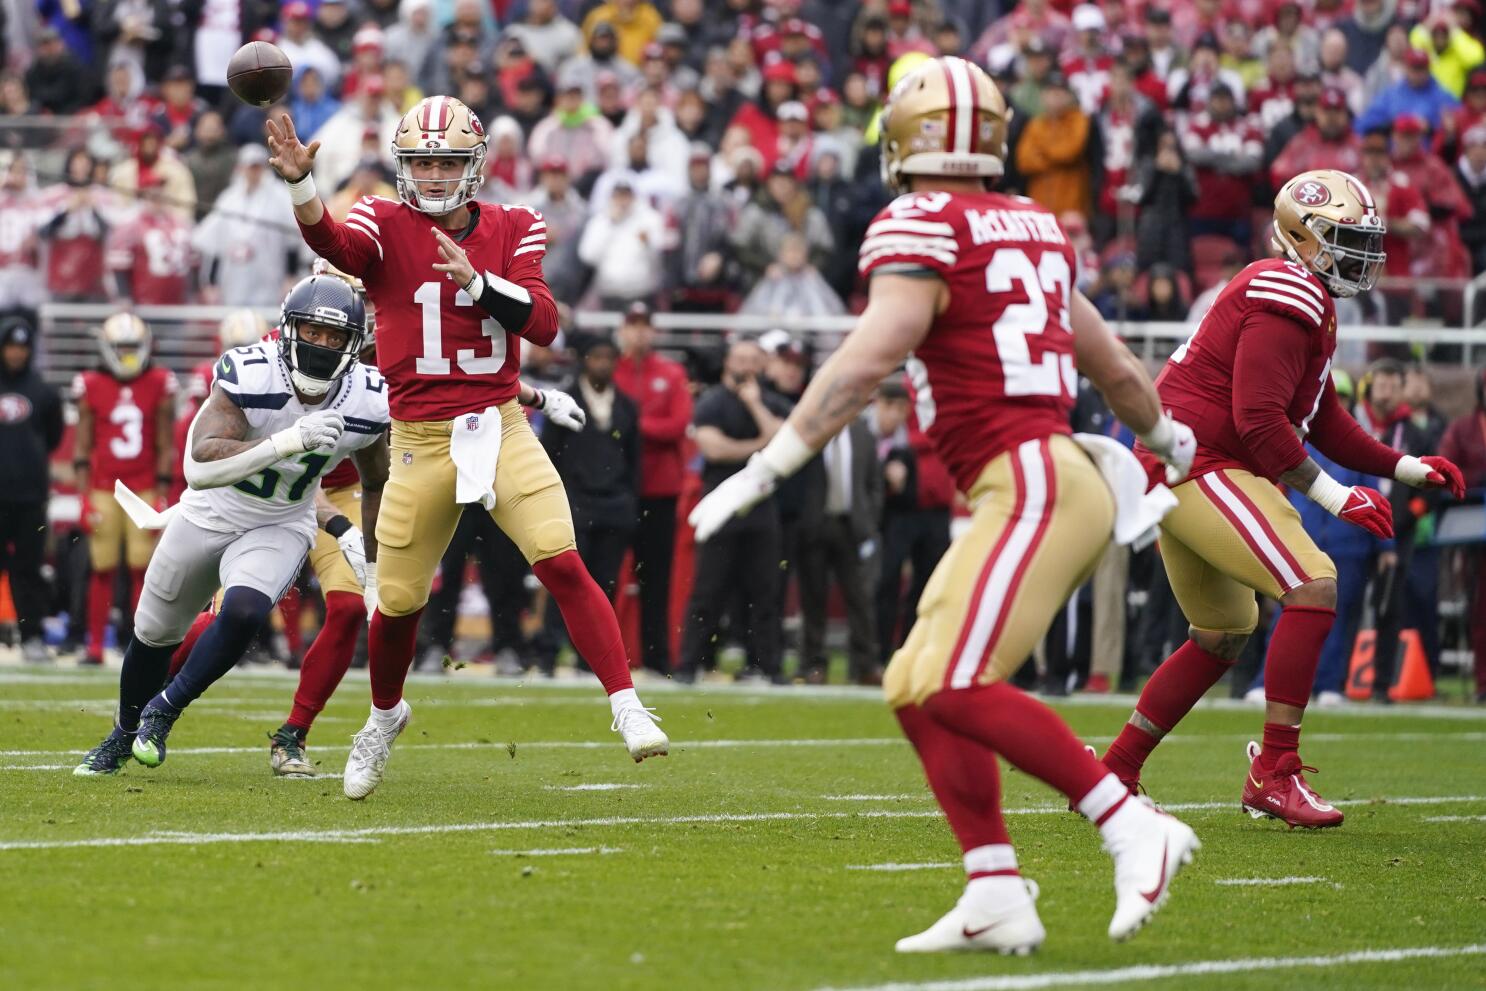 Purdy's 4 TDs lead 49ers past Seahawks 41-23 in playoffs - The San